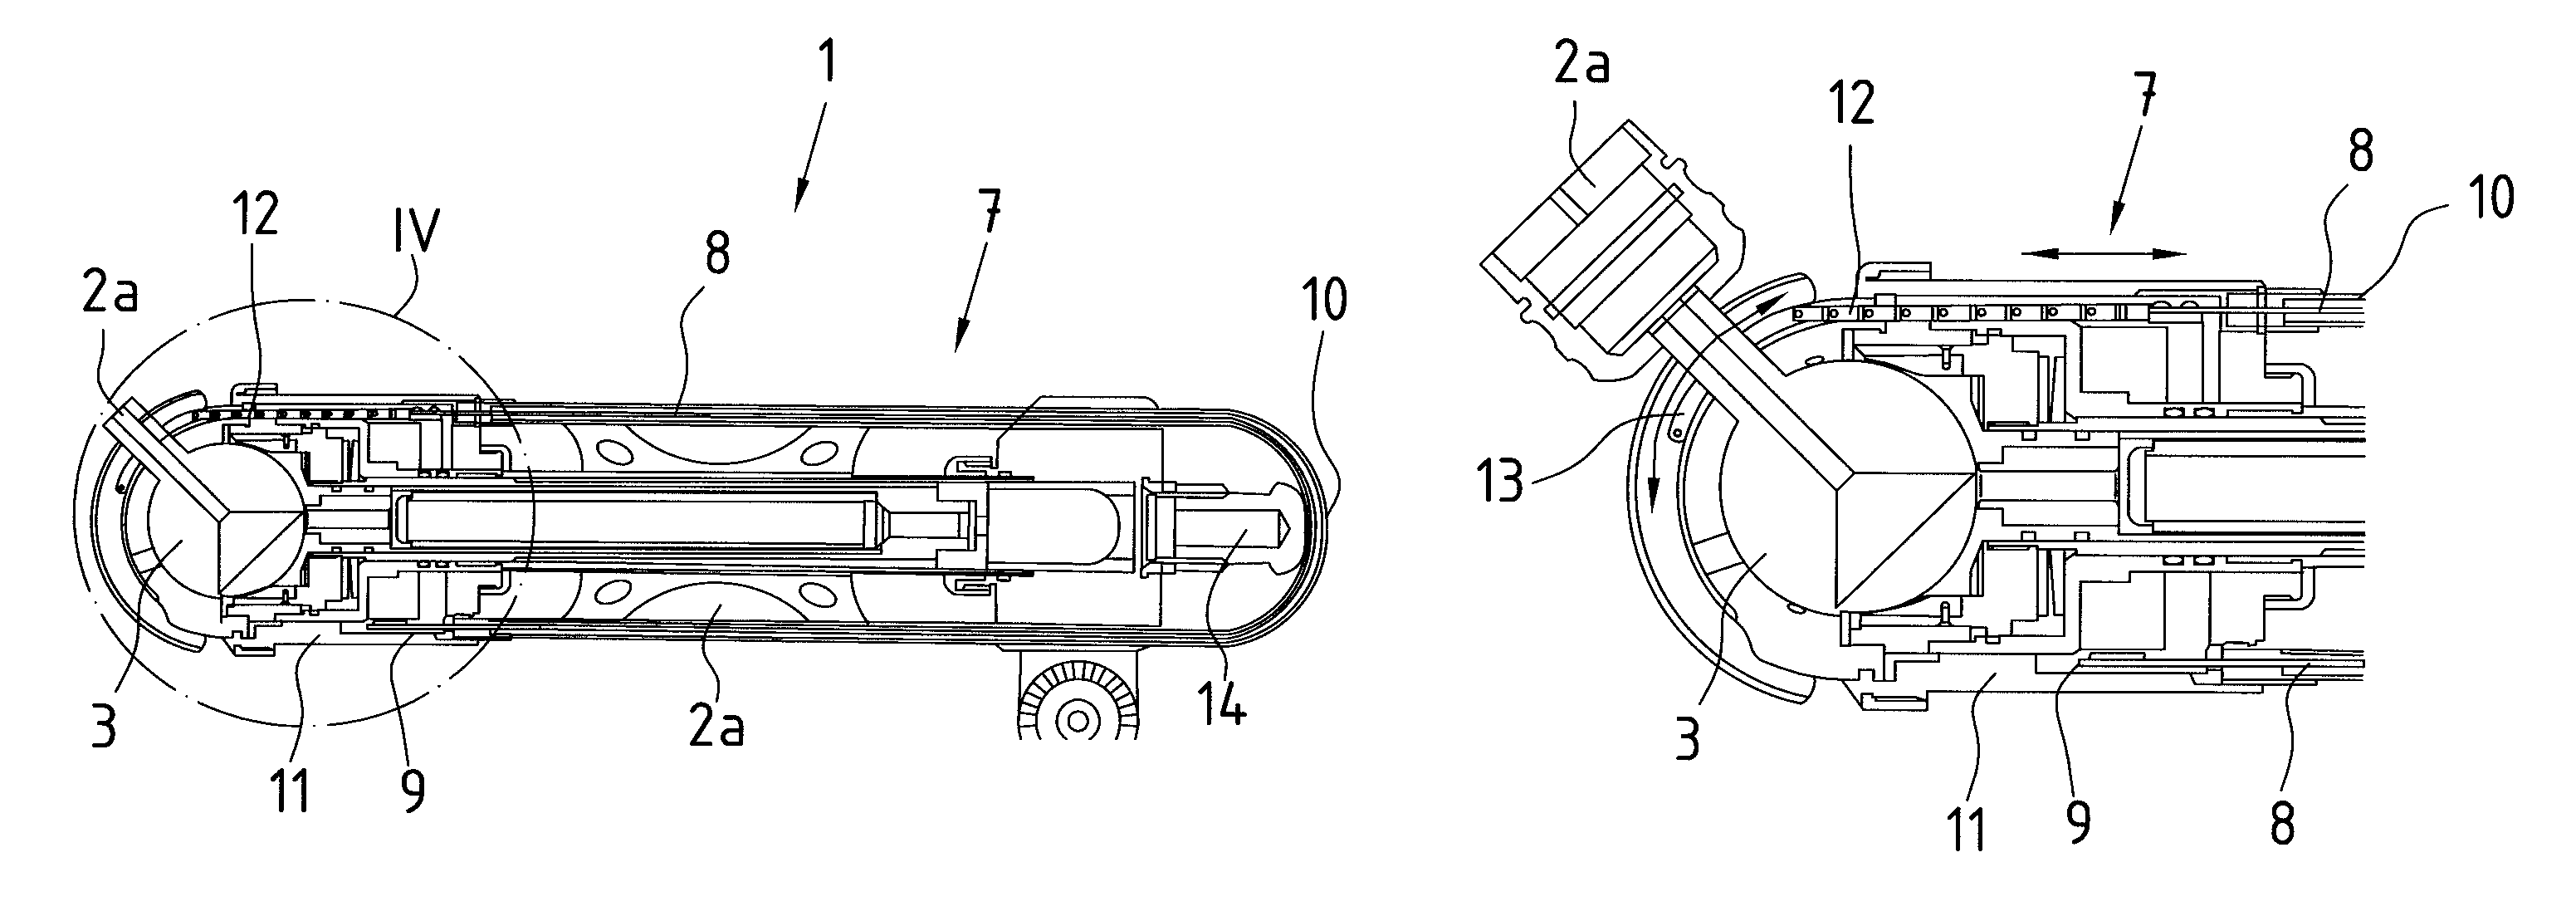 Holding device for medical instruments